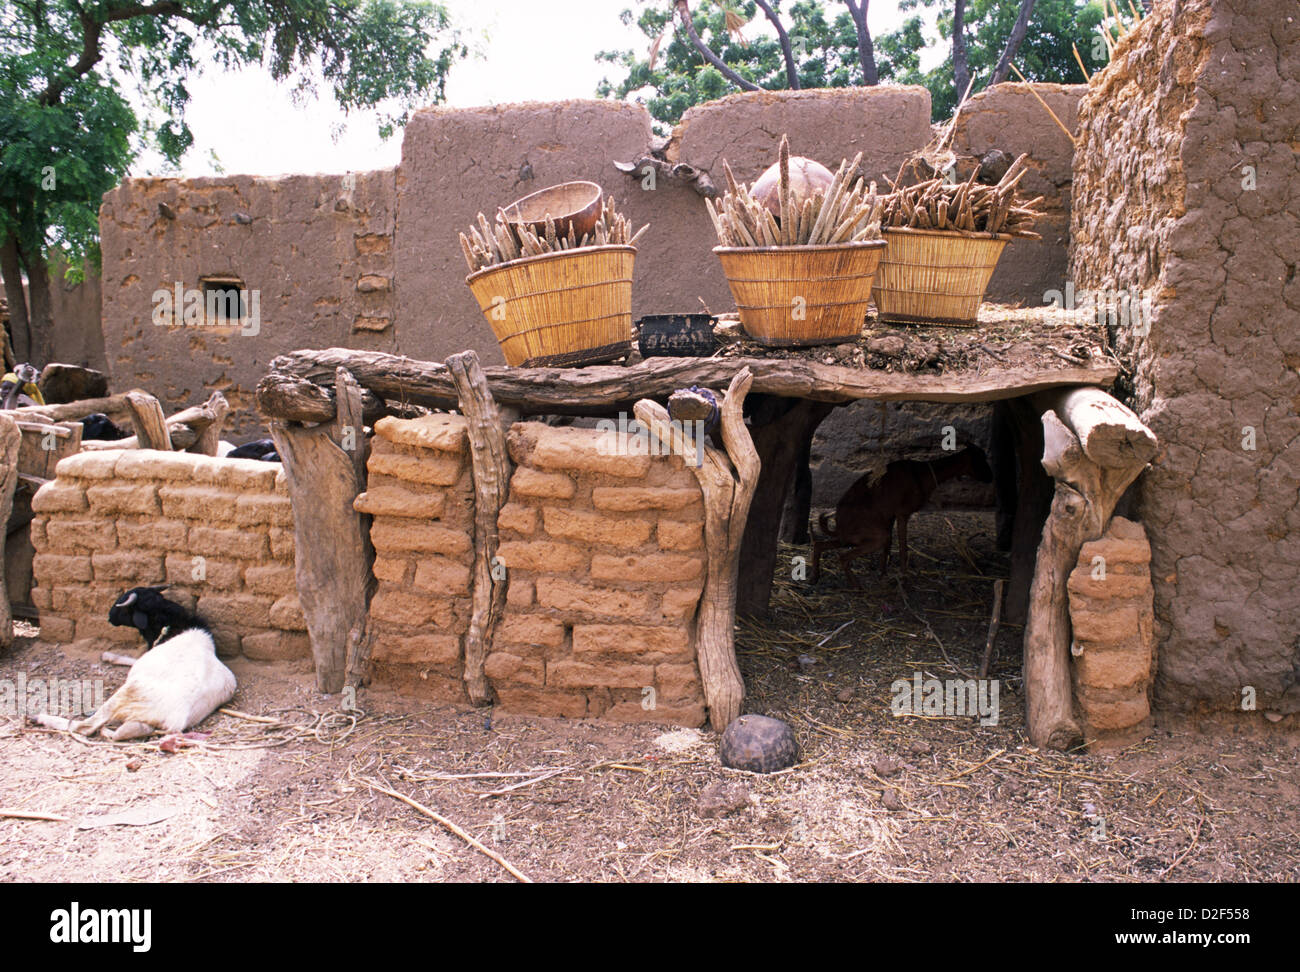 Shelter for the goats in a village on the Dogon Plateau in Mali, West Africa. Millet and sorghum is being dried on the roof. Stock Photo